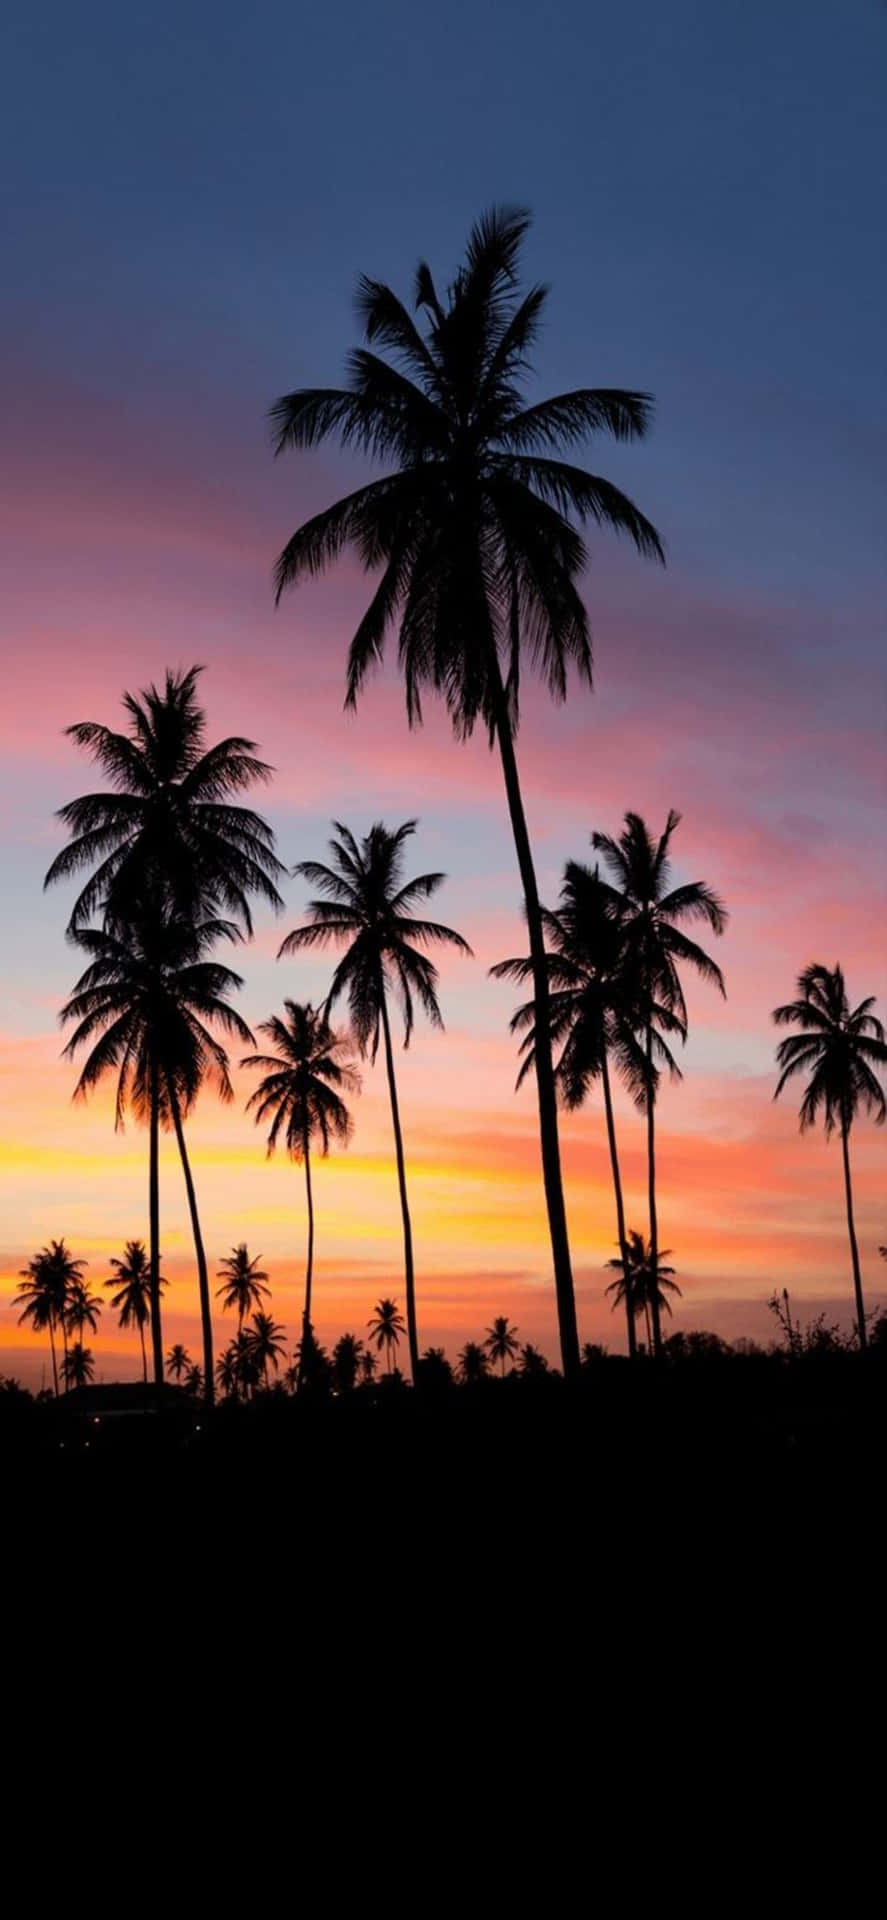 Palm Trees Silhouetted Against A Colorful Sunset